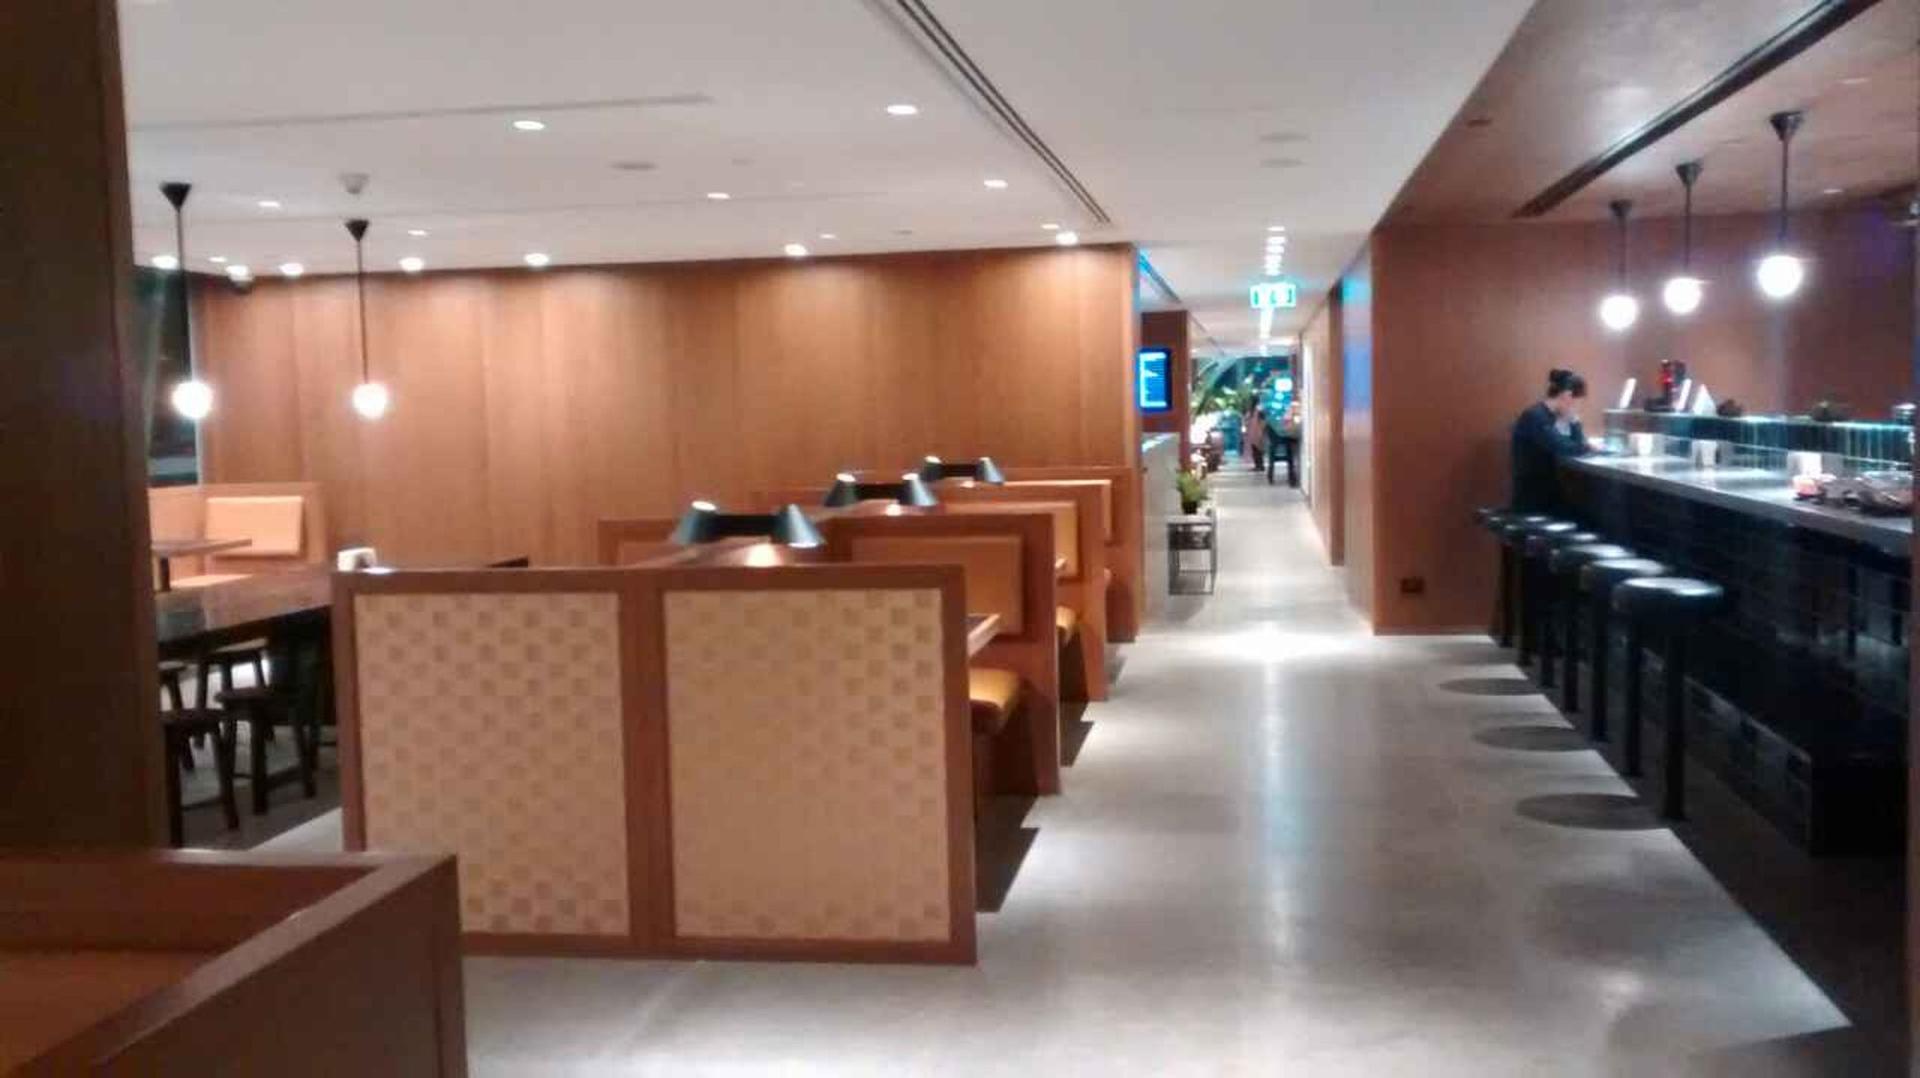 Cathay Pacific First and Business Class Lounge image 19 of 69